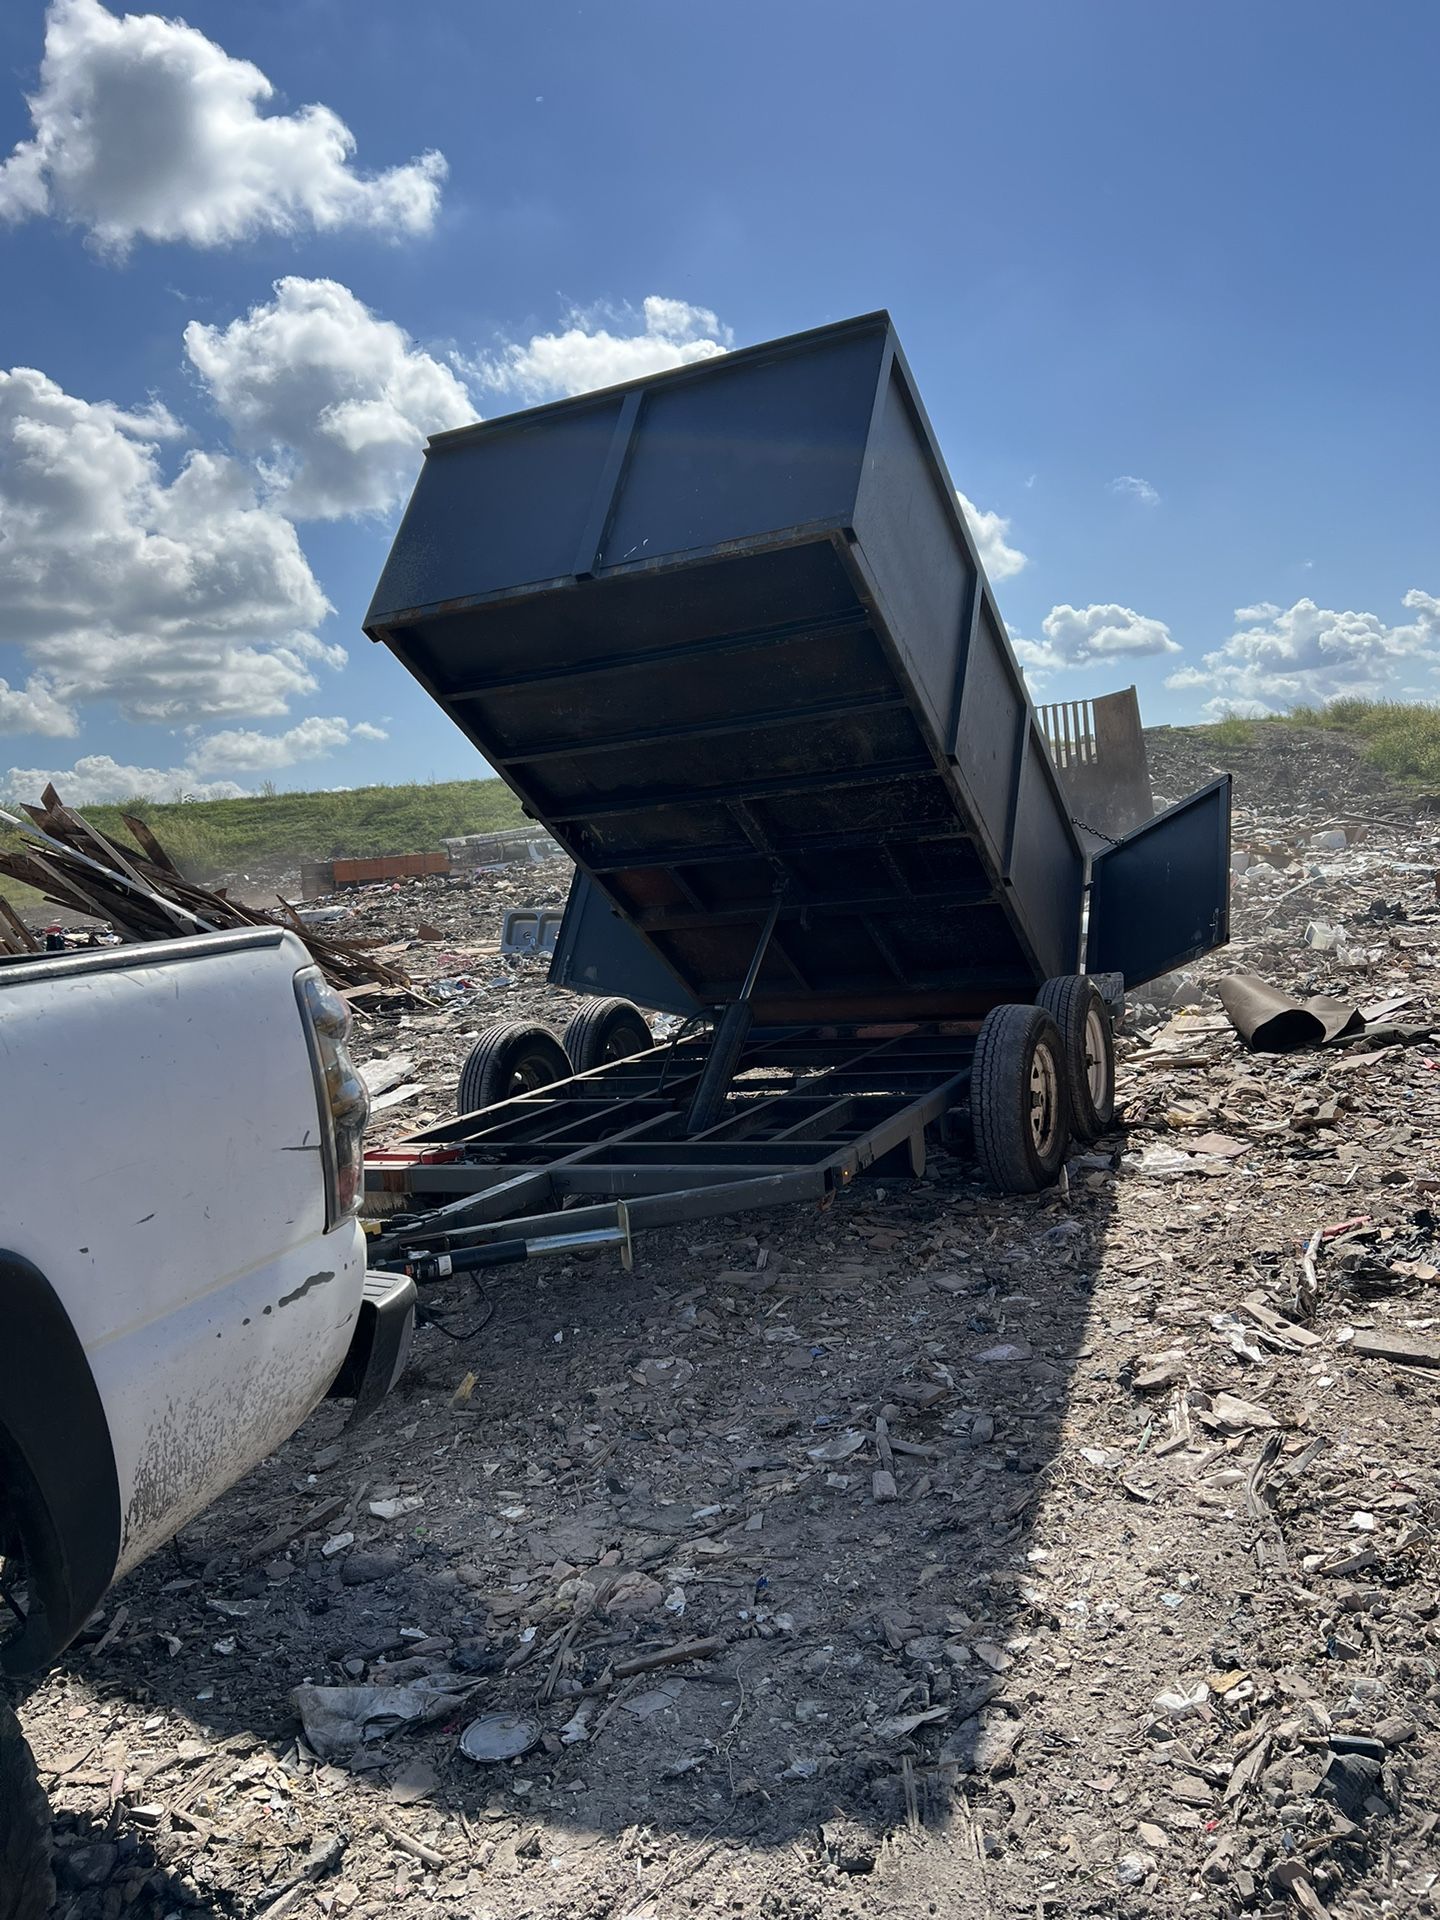 2013 Dump Trailer Not Free Send Me Your Offer